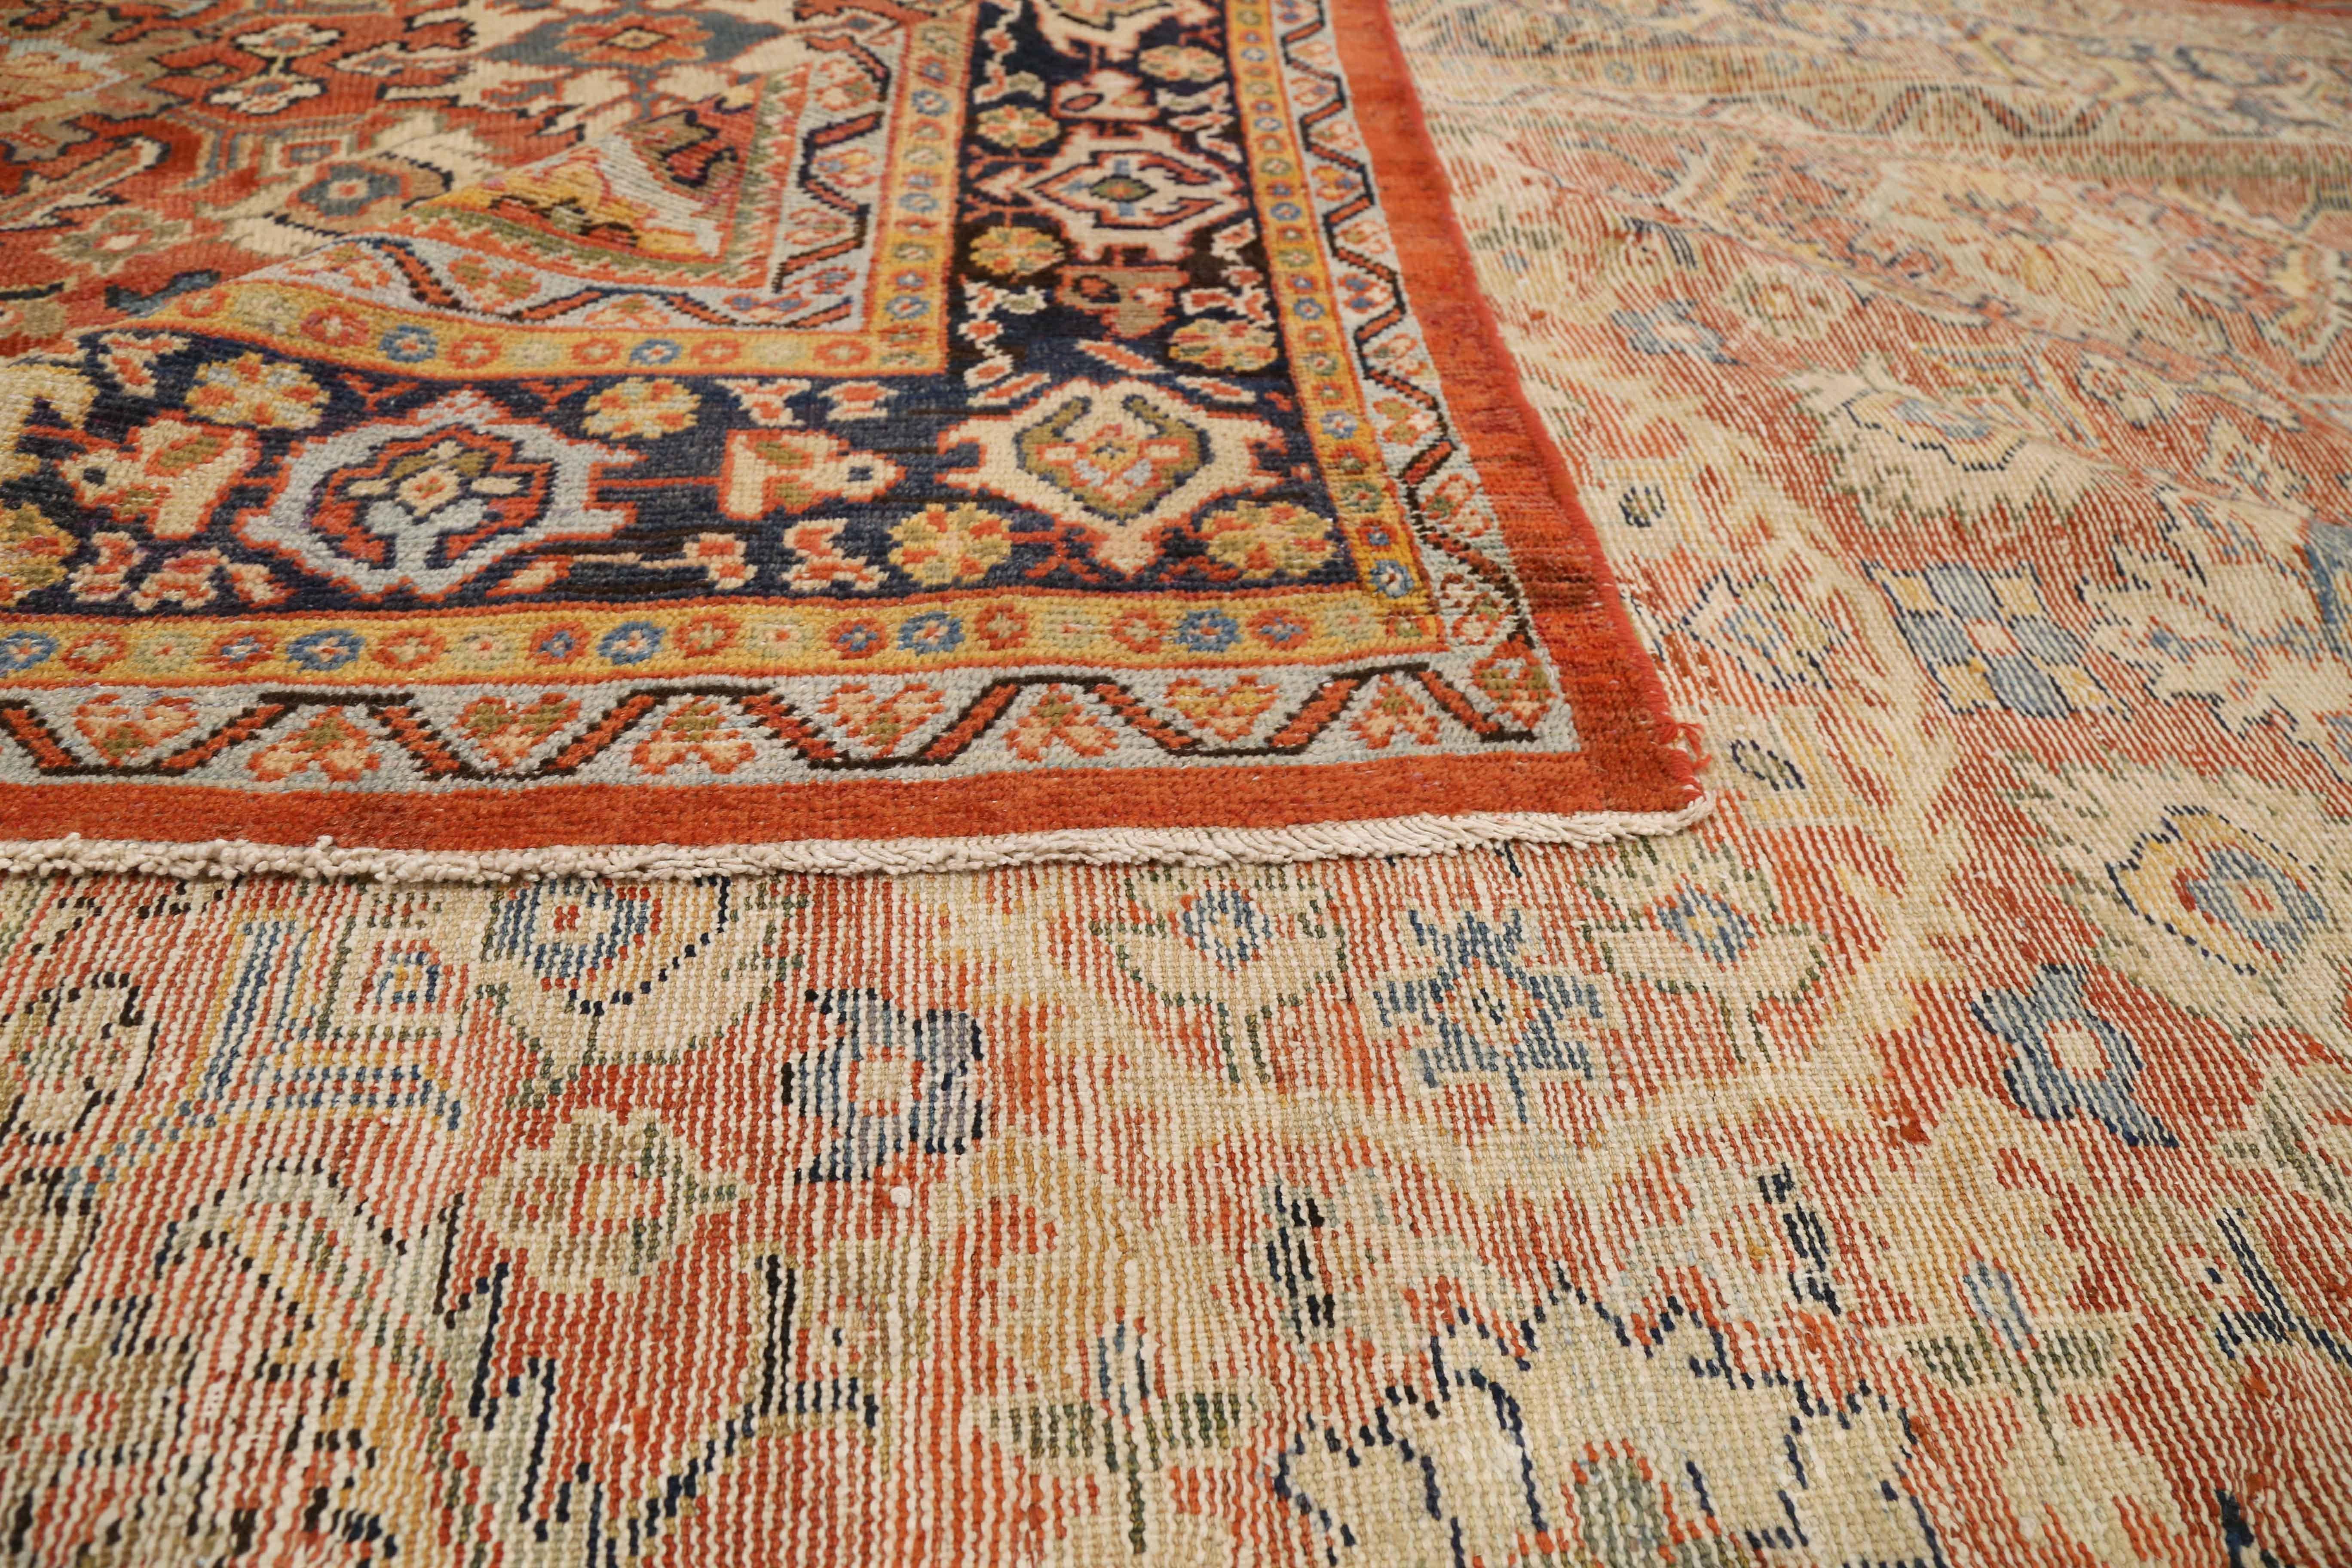 1920s-era antique Persian rug handwoven from exquisite sheep’s wool and tinted with all-organic dyes. It was made using a weaving style that made the work of Sultanabad weavers prominent in the world of Persian rugs. It features dynamic geometric